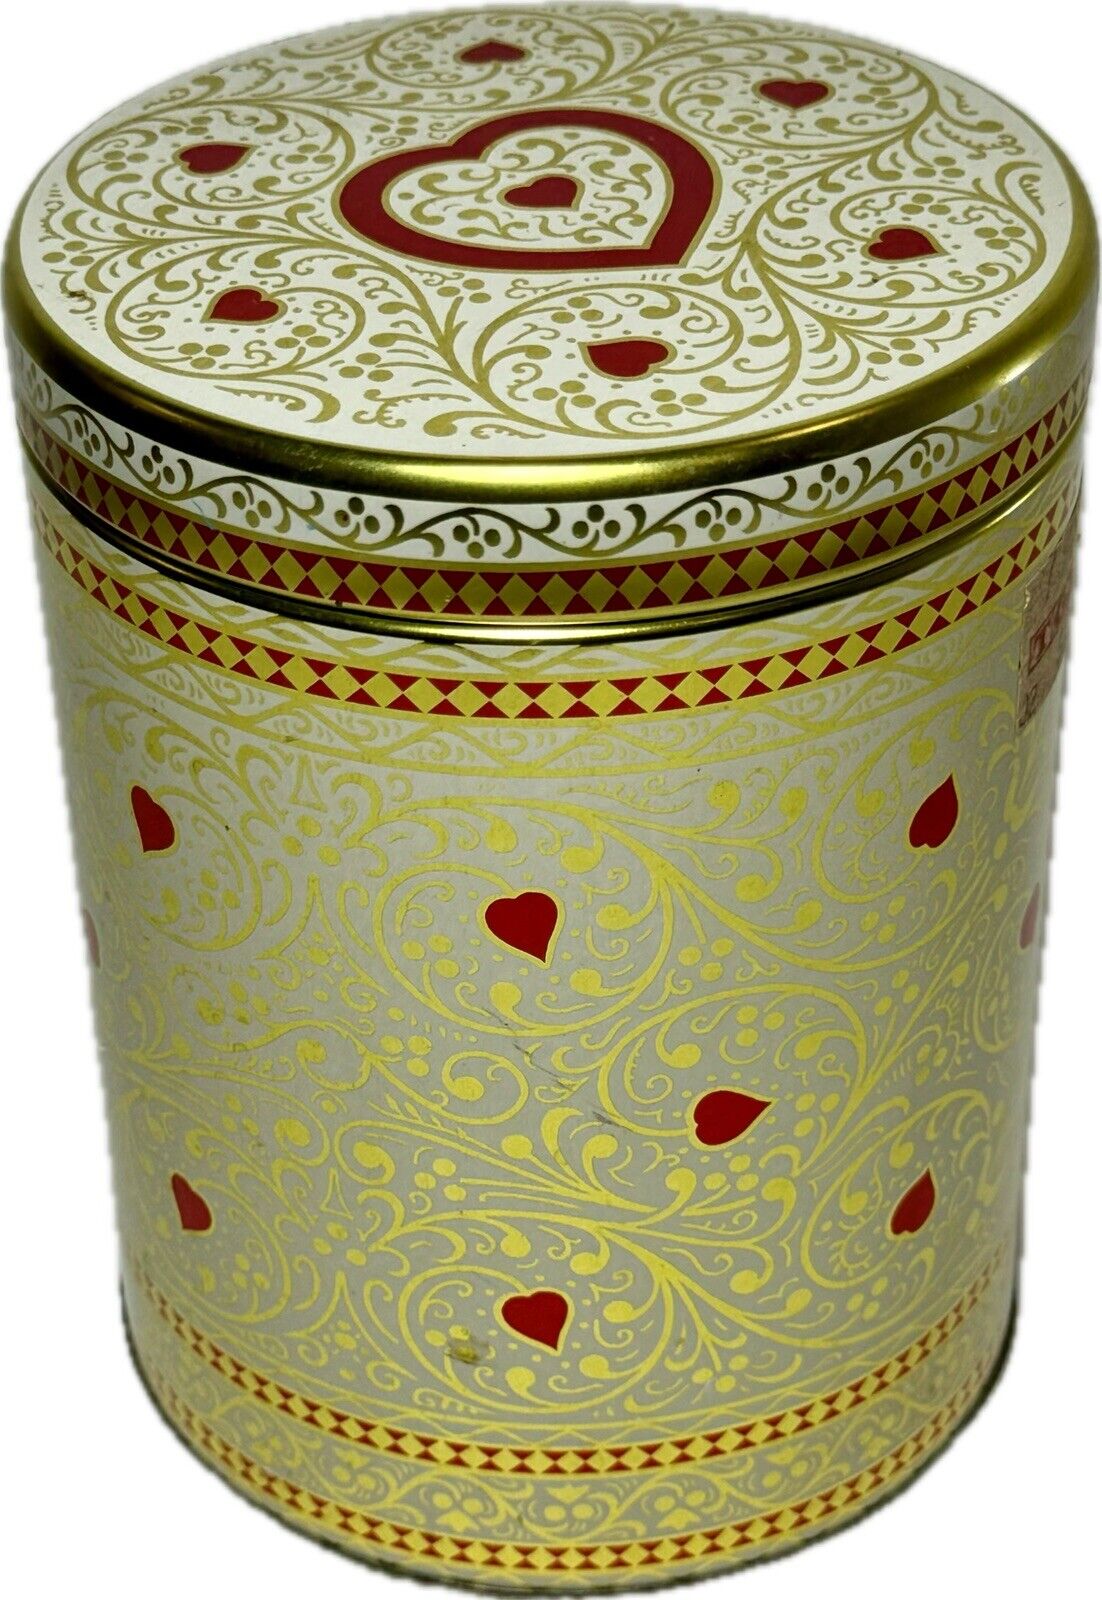 Vintage Daher Round Tea Tin with Lid Gold Filigree Red Hearts England